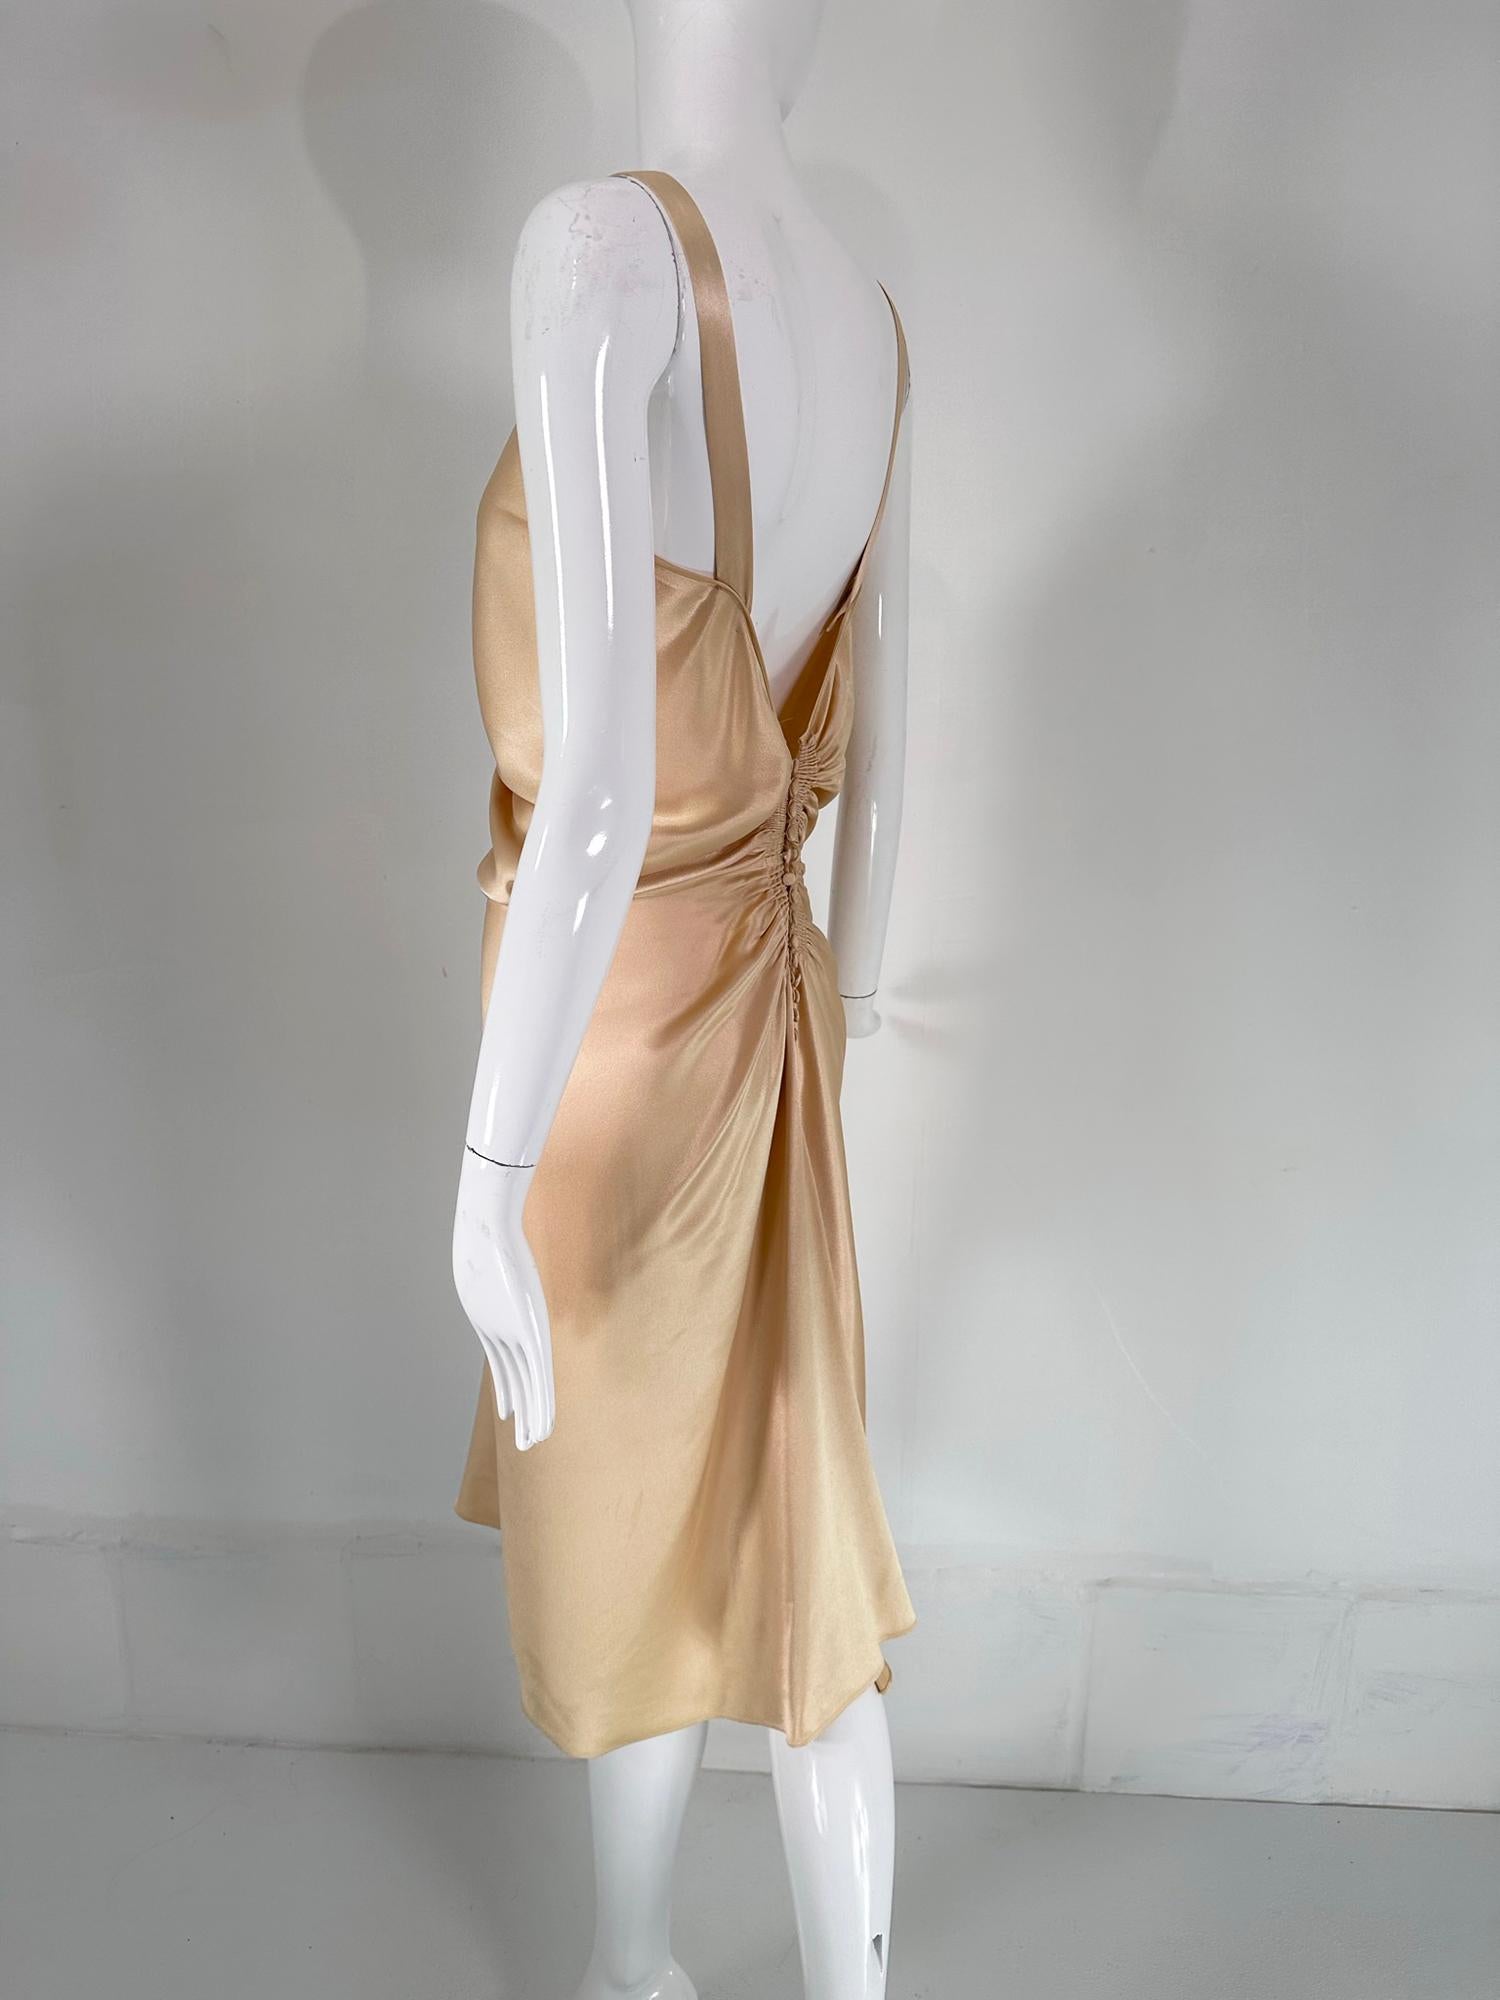 John Galliano Glamourous Gold Satin Shirred Front Button Back Evening Dress  6 For Sale 5